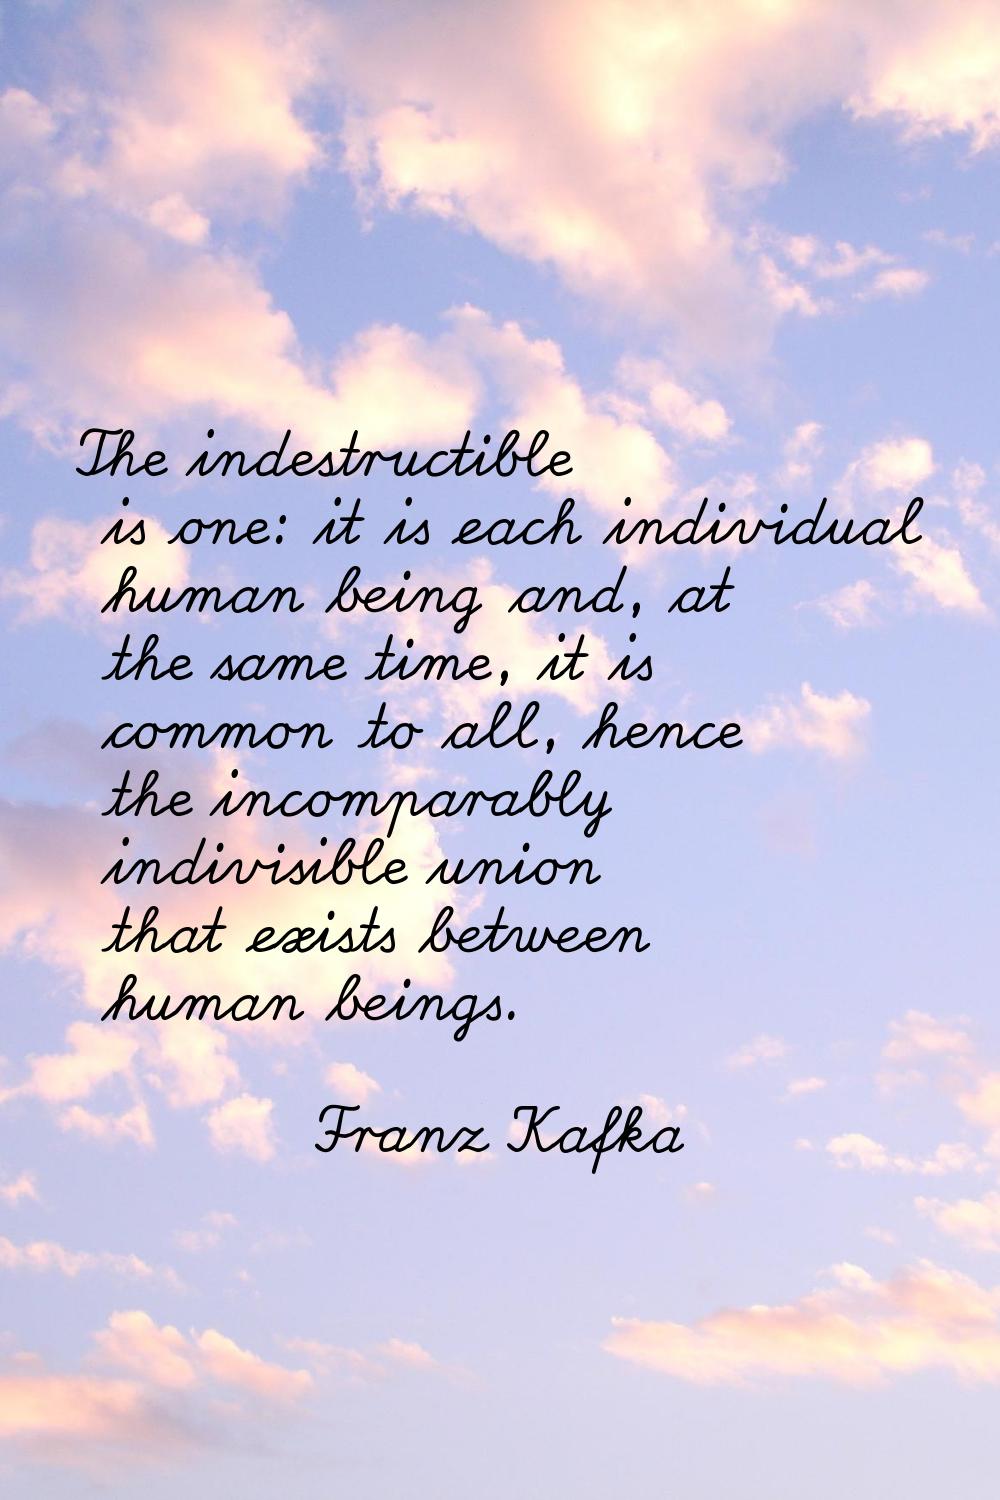 The indestructible is one: it is each individual human being and, at the same time, it is common to